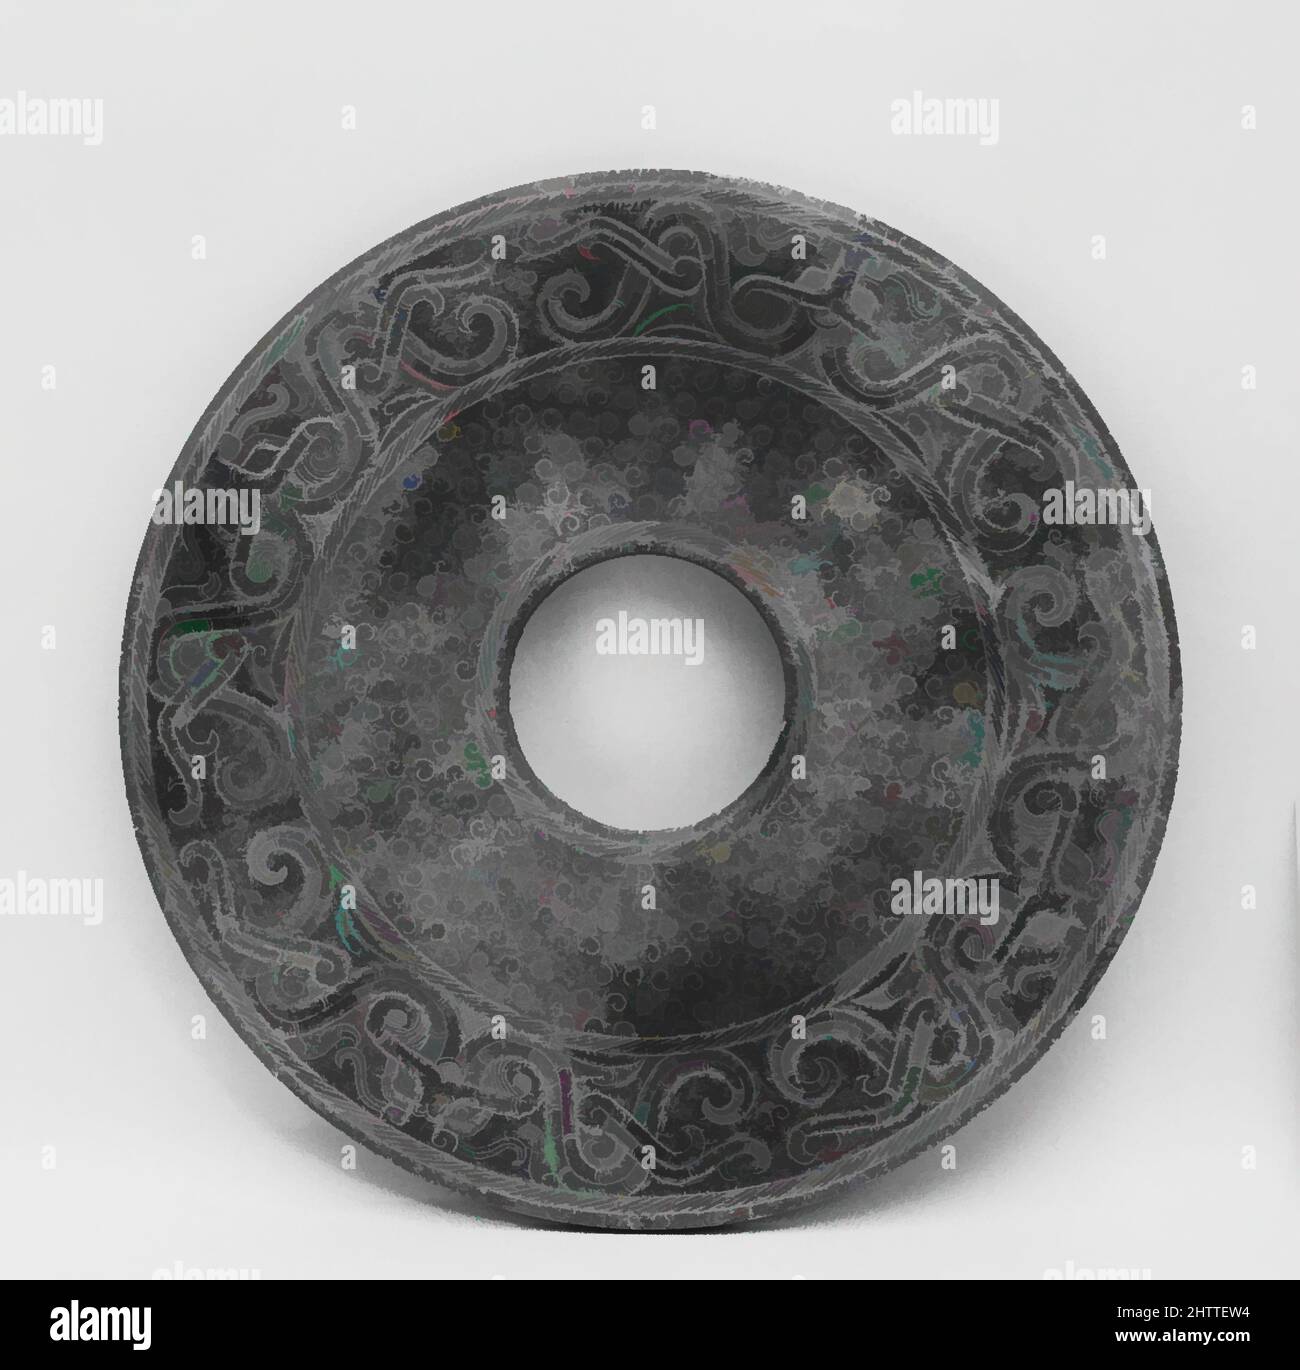 Art inspired by Disk, Han dynasty (206 B.C.–A.D. 220), China, Jade, Diam. 11 7/8 in. (30.2 cm), Jade, Classic works modernized by Artotop with a splash of modernity. Shapes, color and value, eye-catching visual impact on art. Emotions through freedom of artworks in a contemporary way. A timeless message pursuing a wildly creative new direction. Artists turning to the digital medium and creating the Artotop NFT Stock Photo